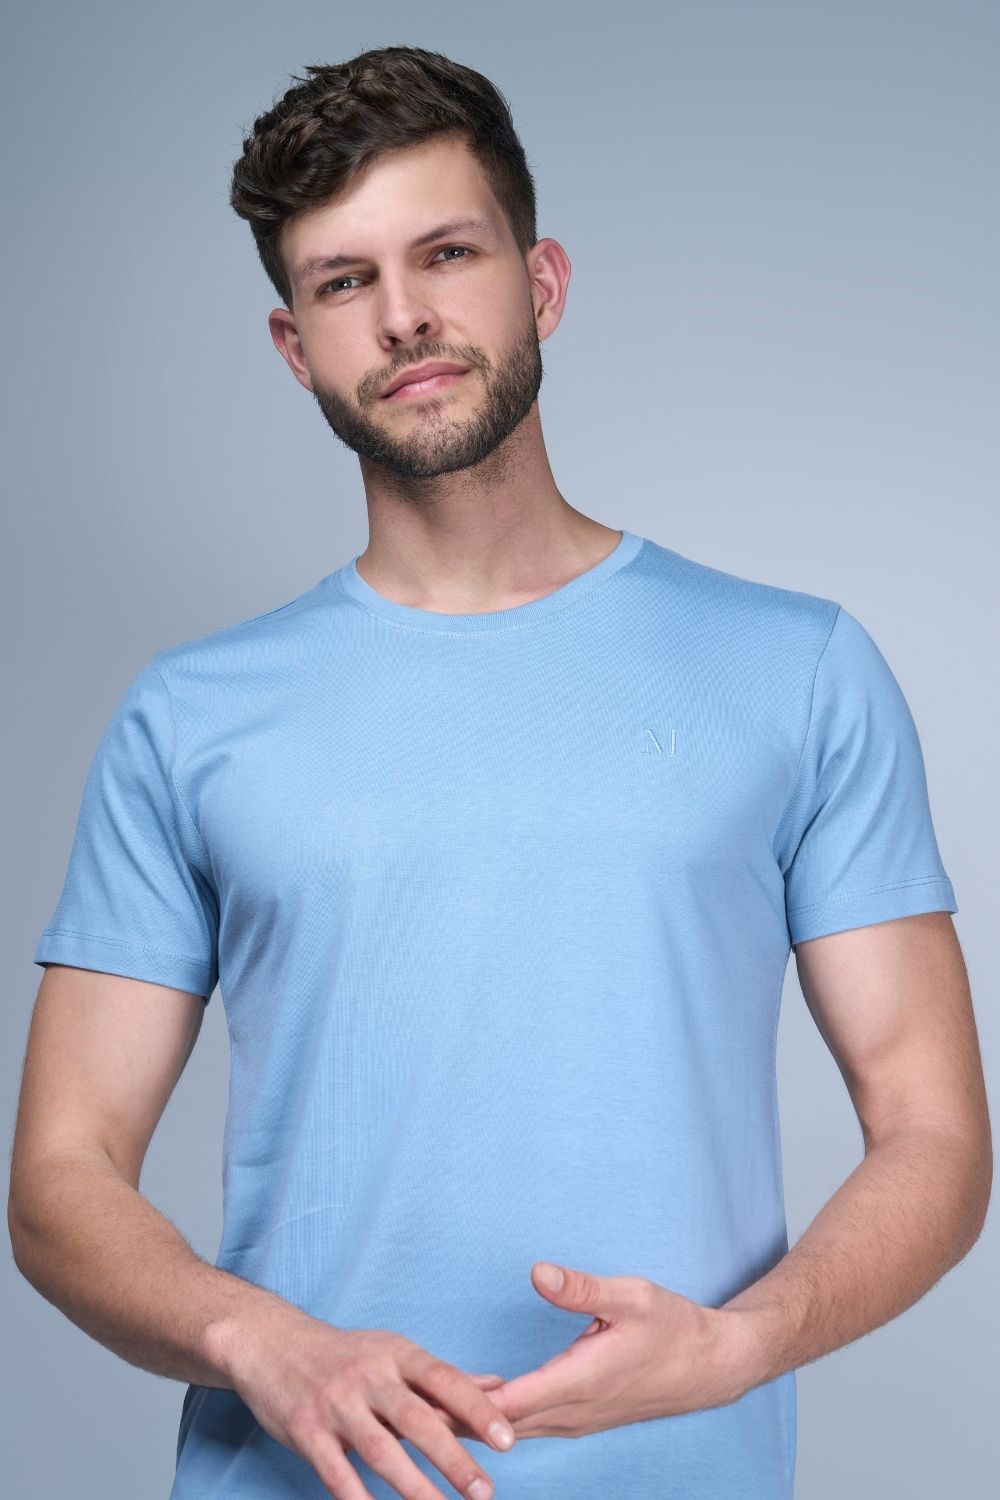 Sky Blue colored, Solid T shirt for men, with half sleeves and round neck.